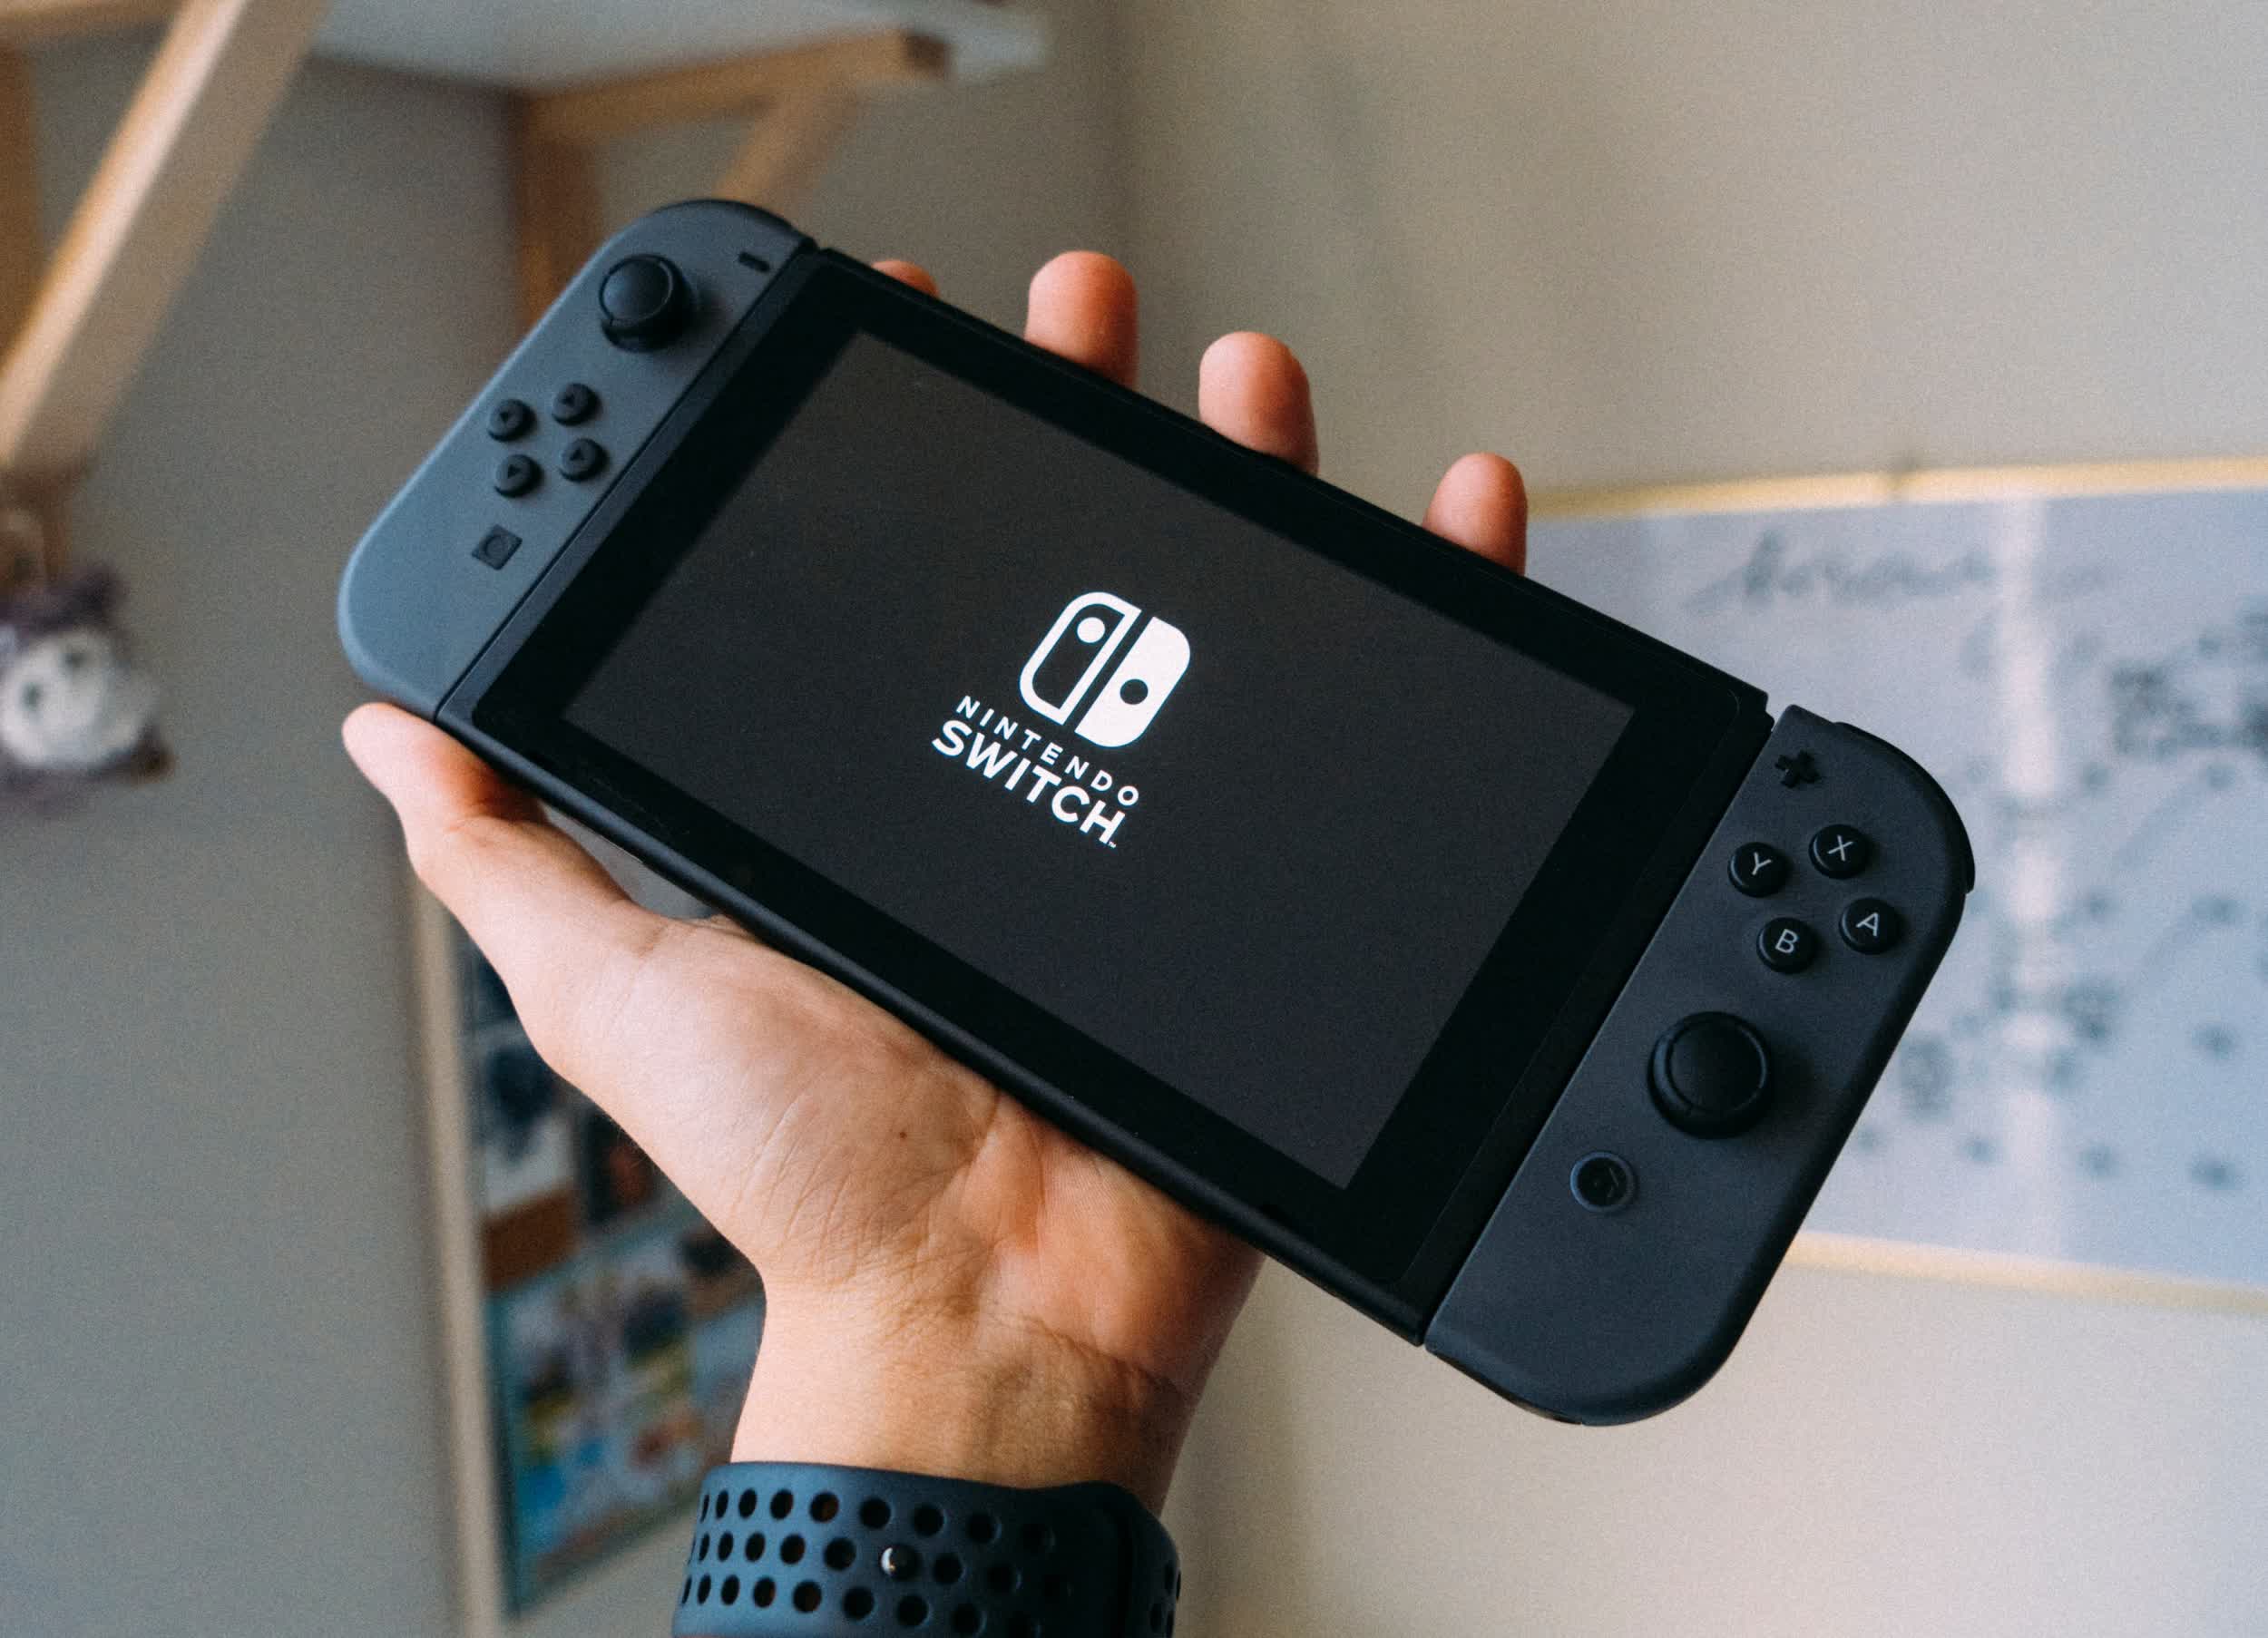 Nintendo Switch sales dip due to chip shortage, but full-year forecast remains unchanged